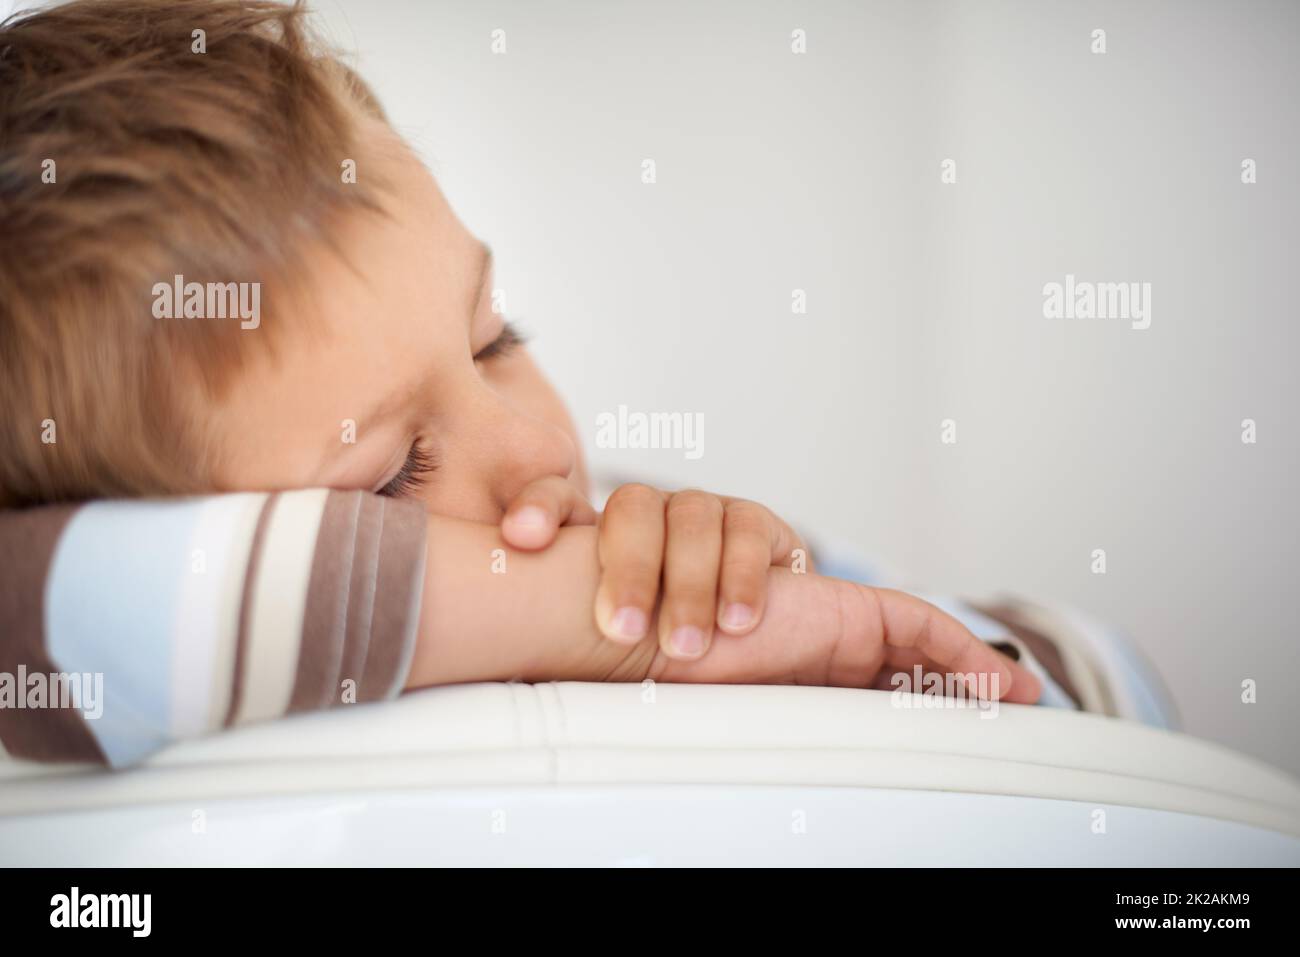 Nap time. A cropped shot of a cute little boy sleeping. Stock Photo